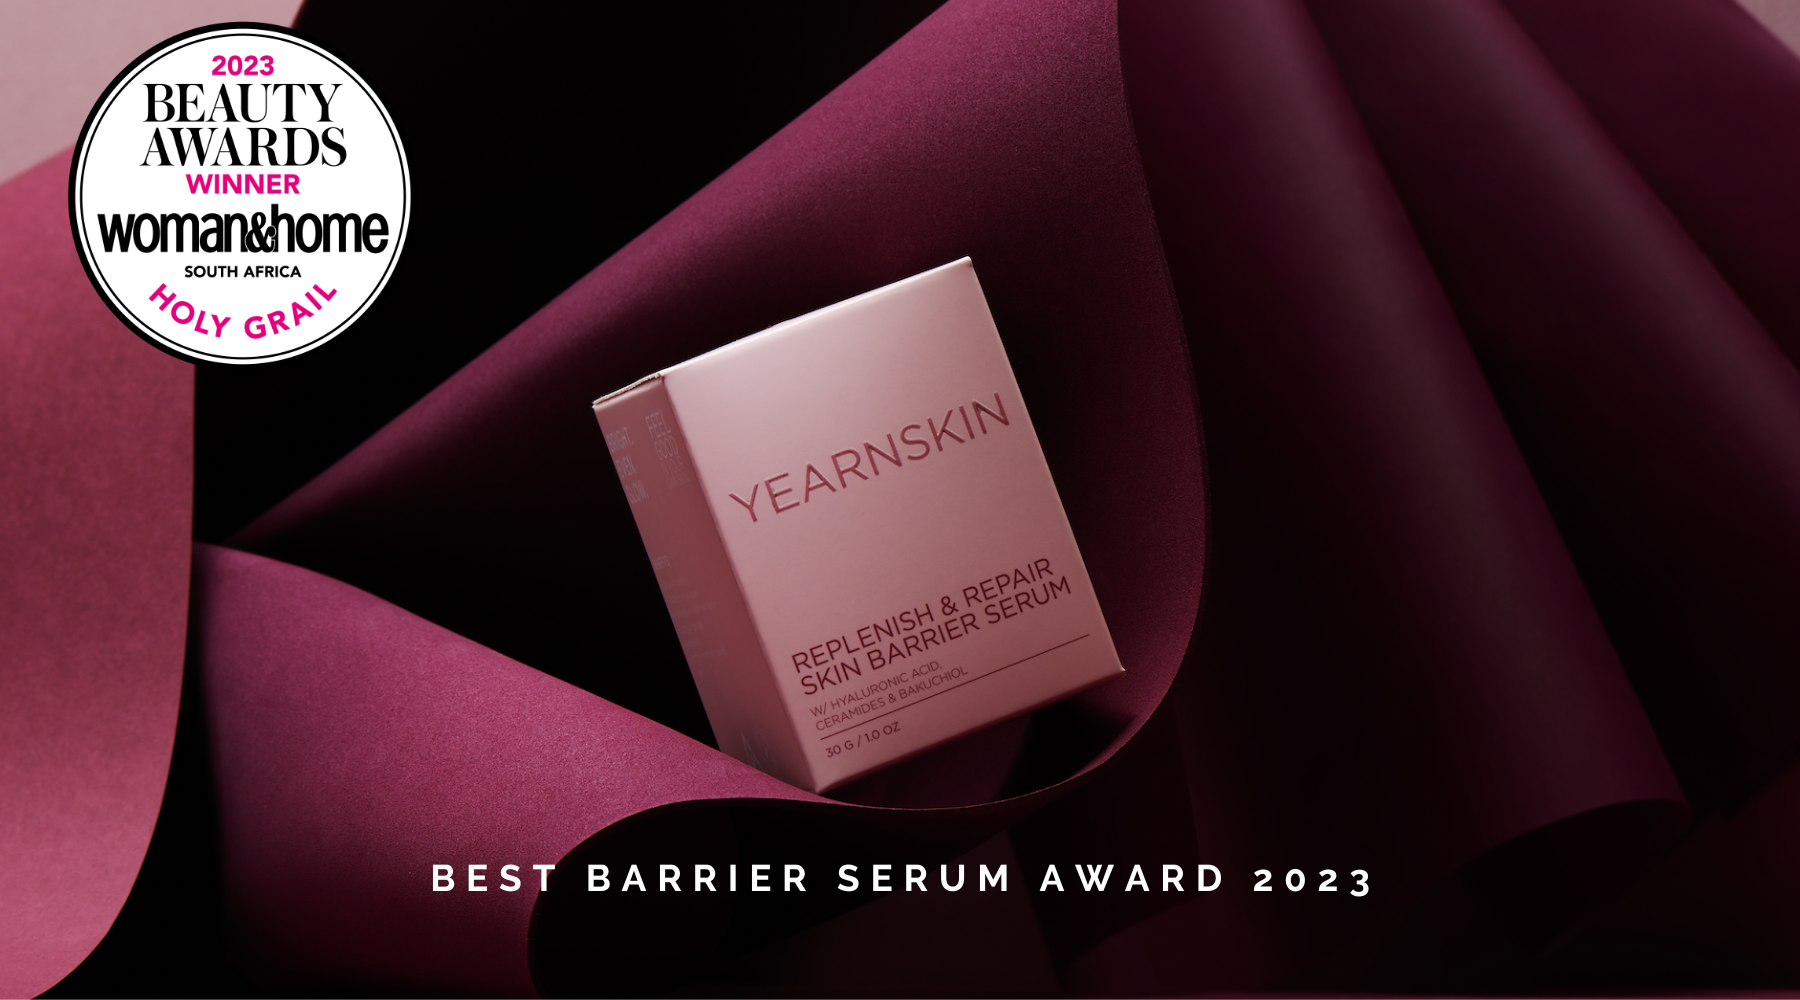 Yearn Skin: Winner at the 2023 Woman&Home Beauty Awards